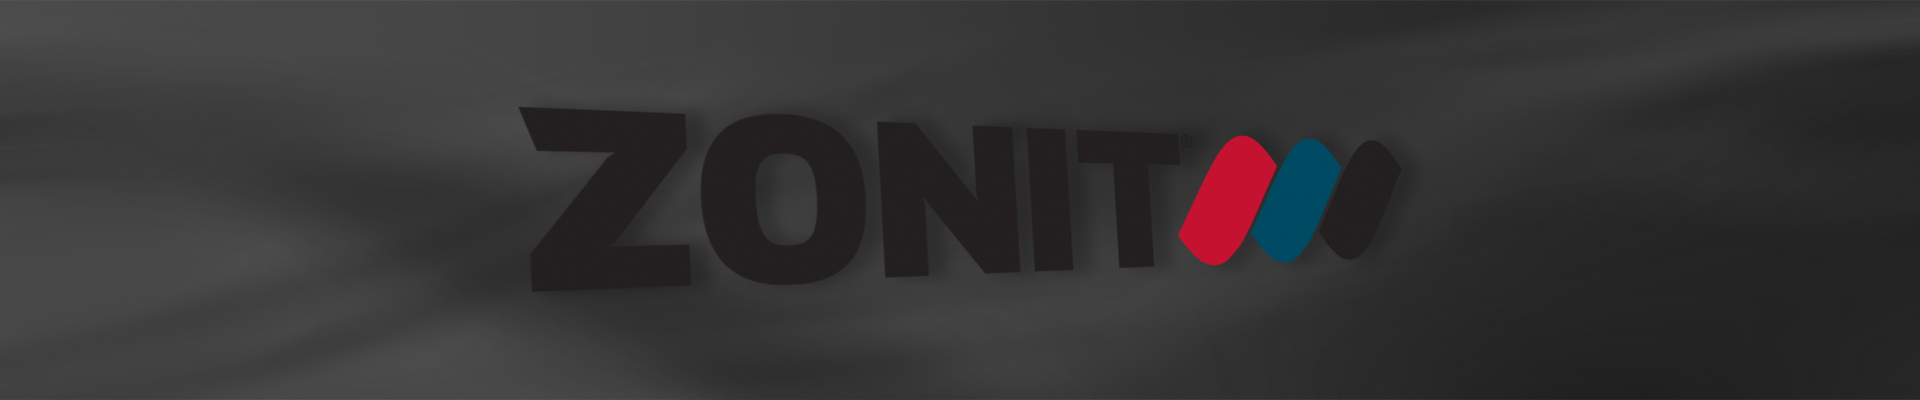 Zonit Banner